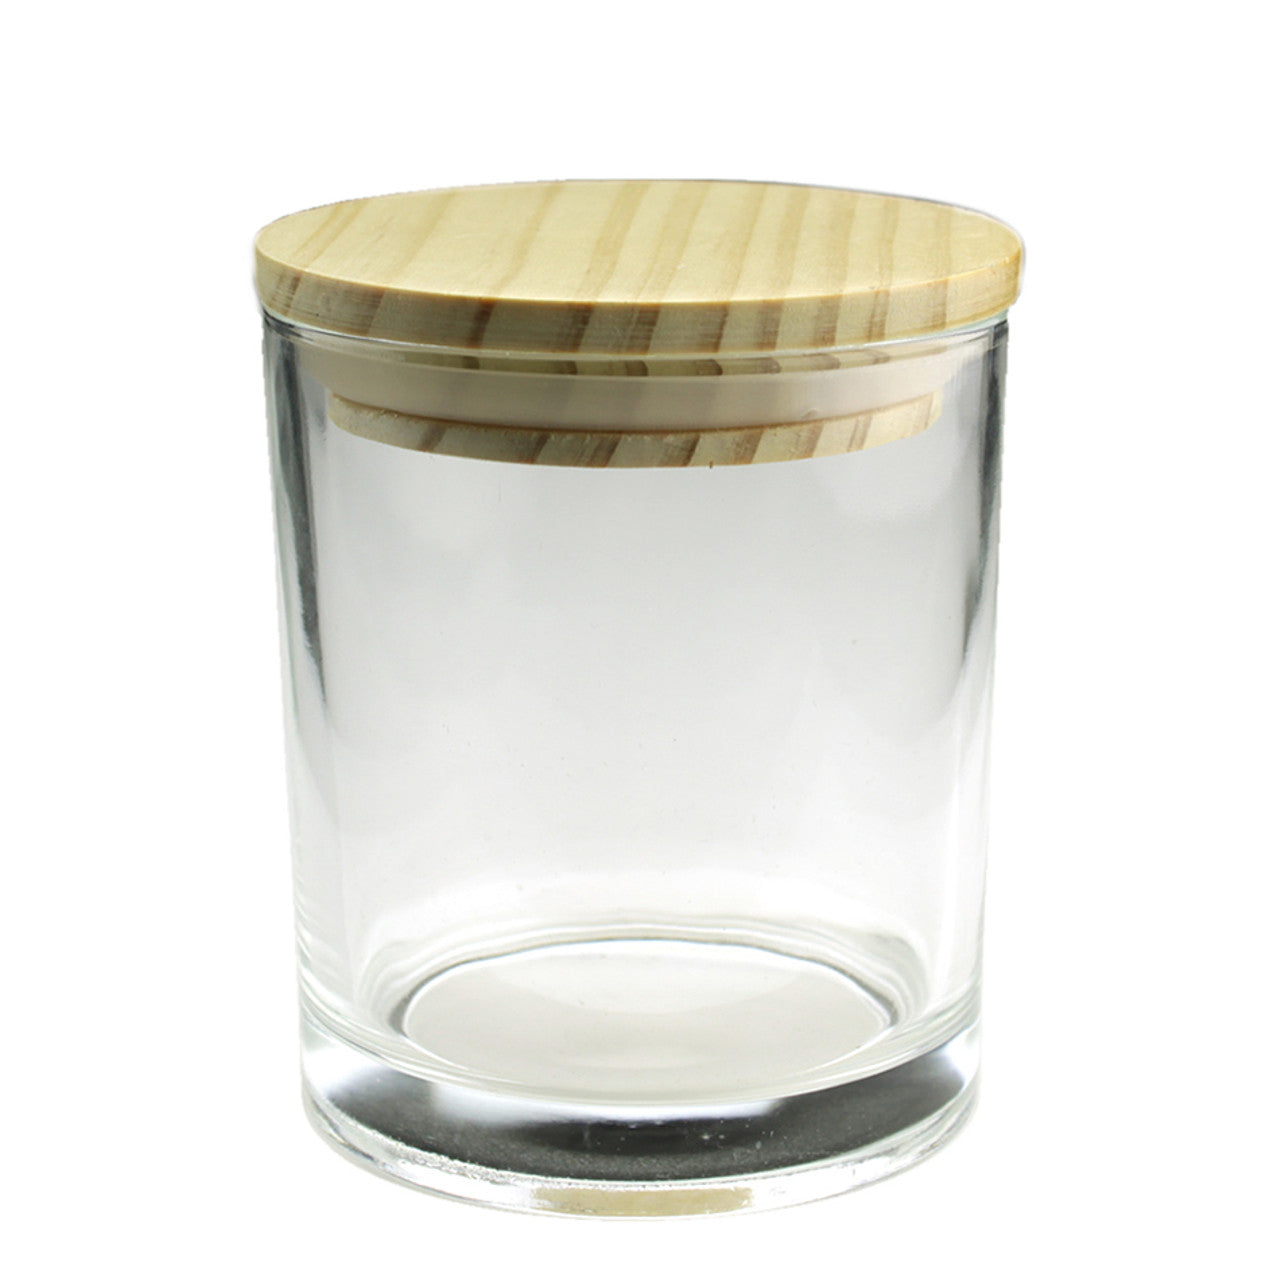 7 oz. clear upgrade jar with natural wood lid